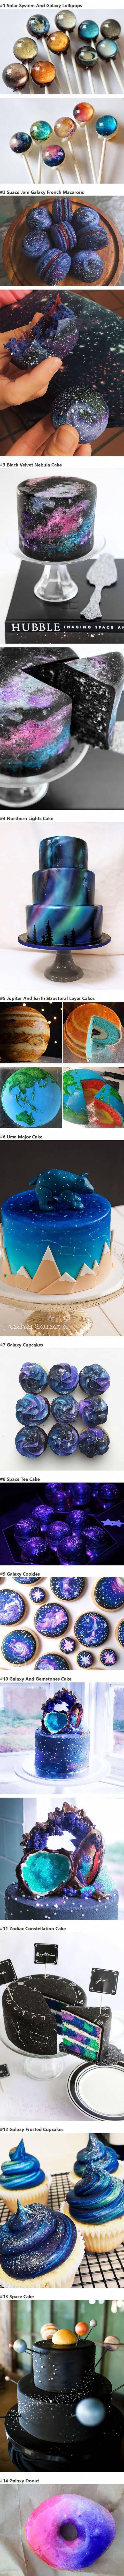 Galaxy Inspired Desserts And Sweets That Are Out Of This World